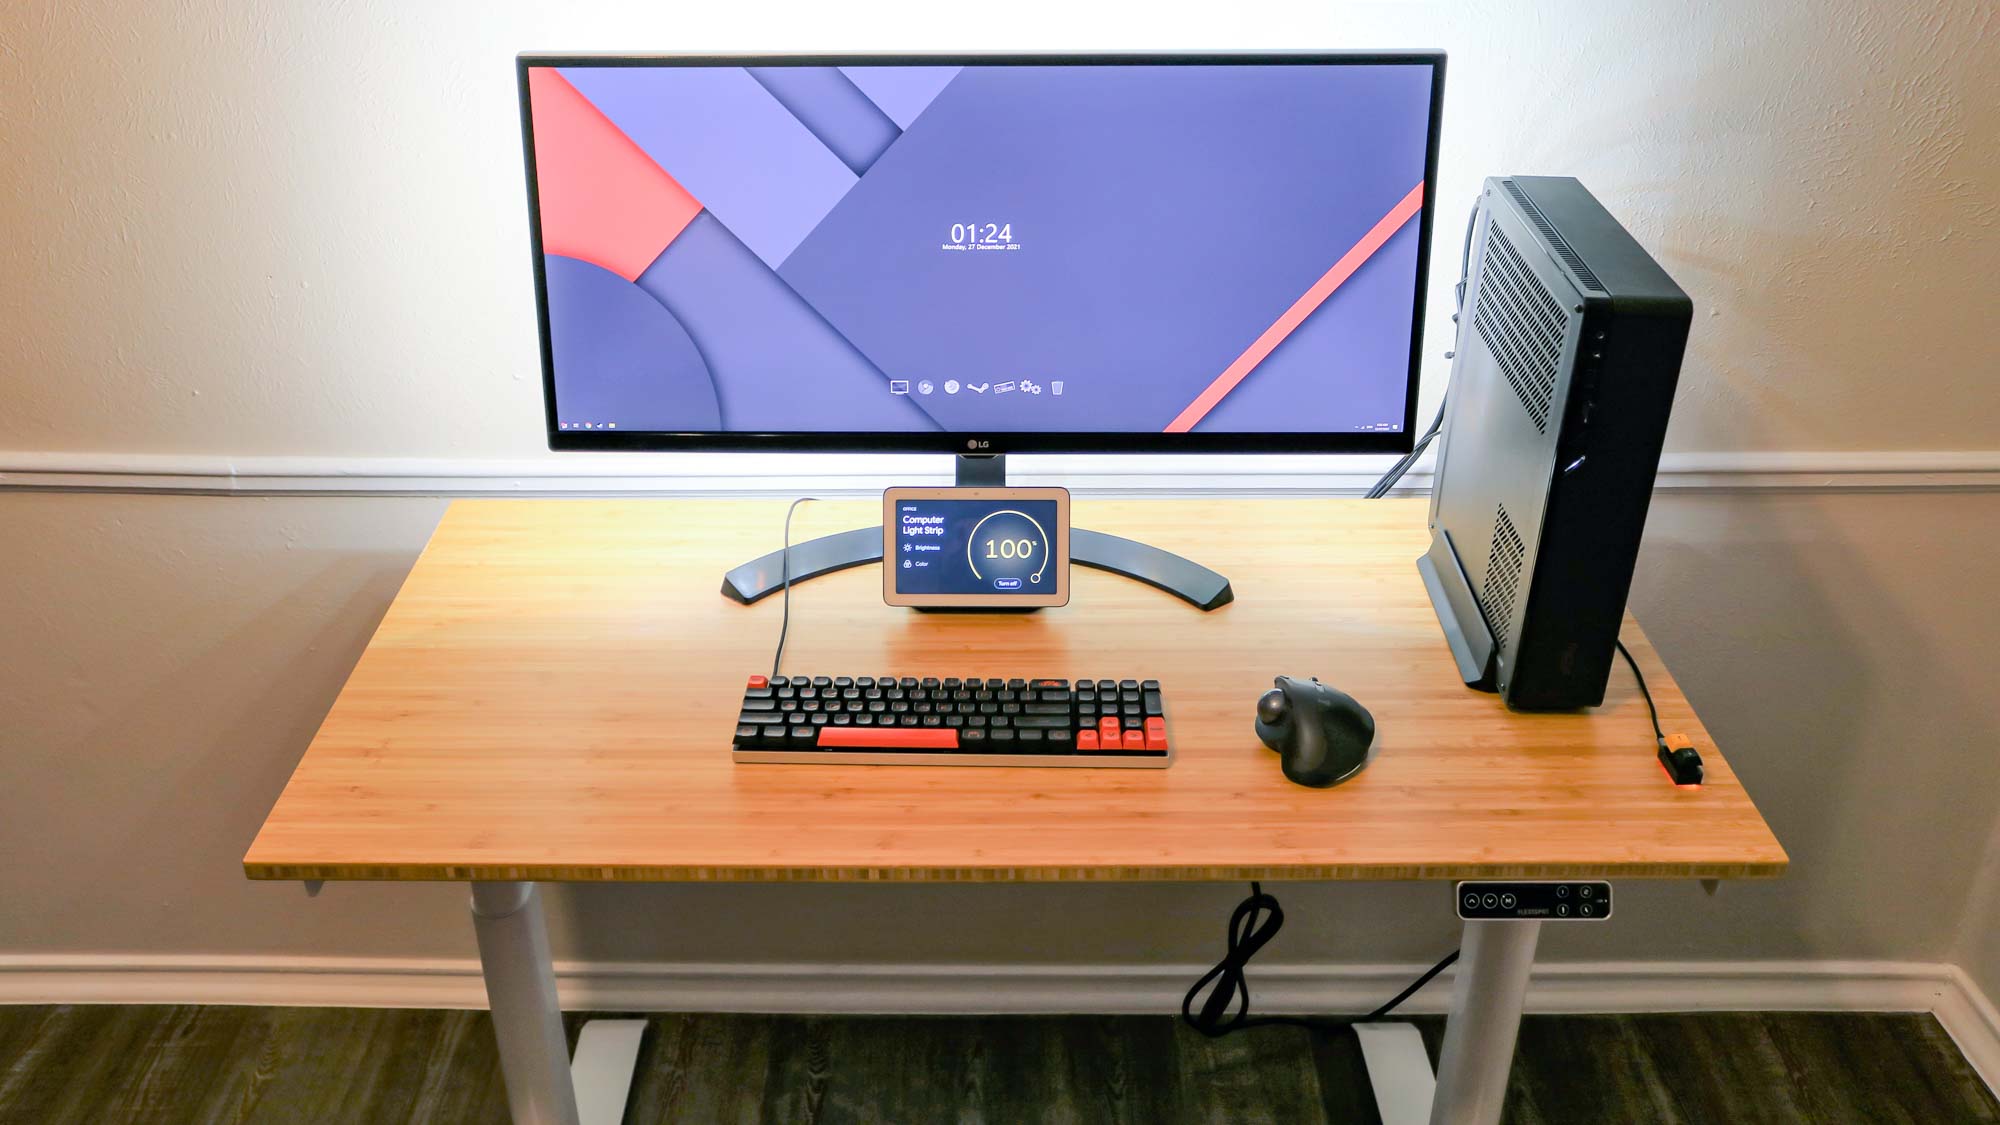 An overhead view of a standing desk with a monitor and desktop PC